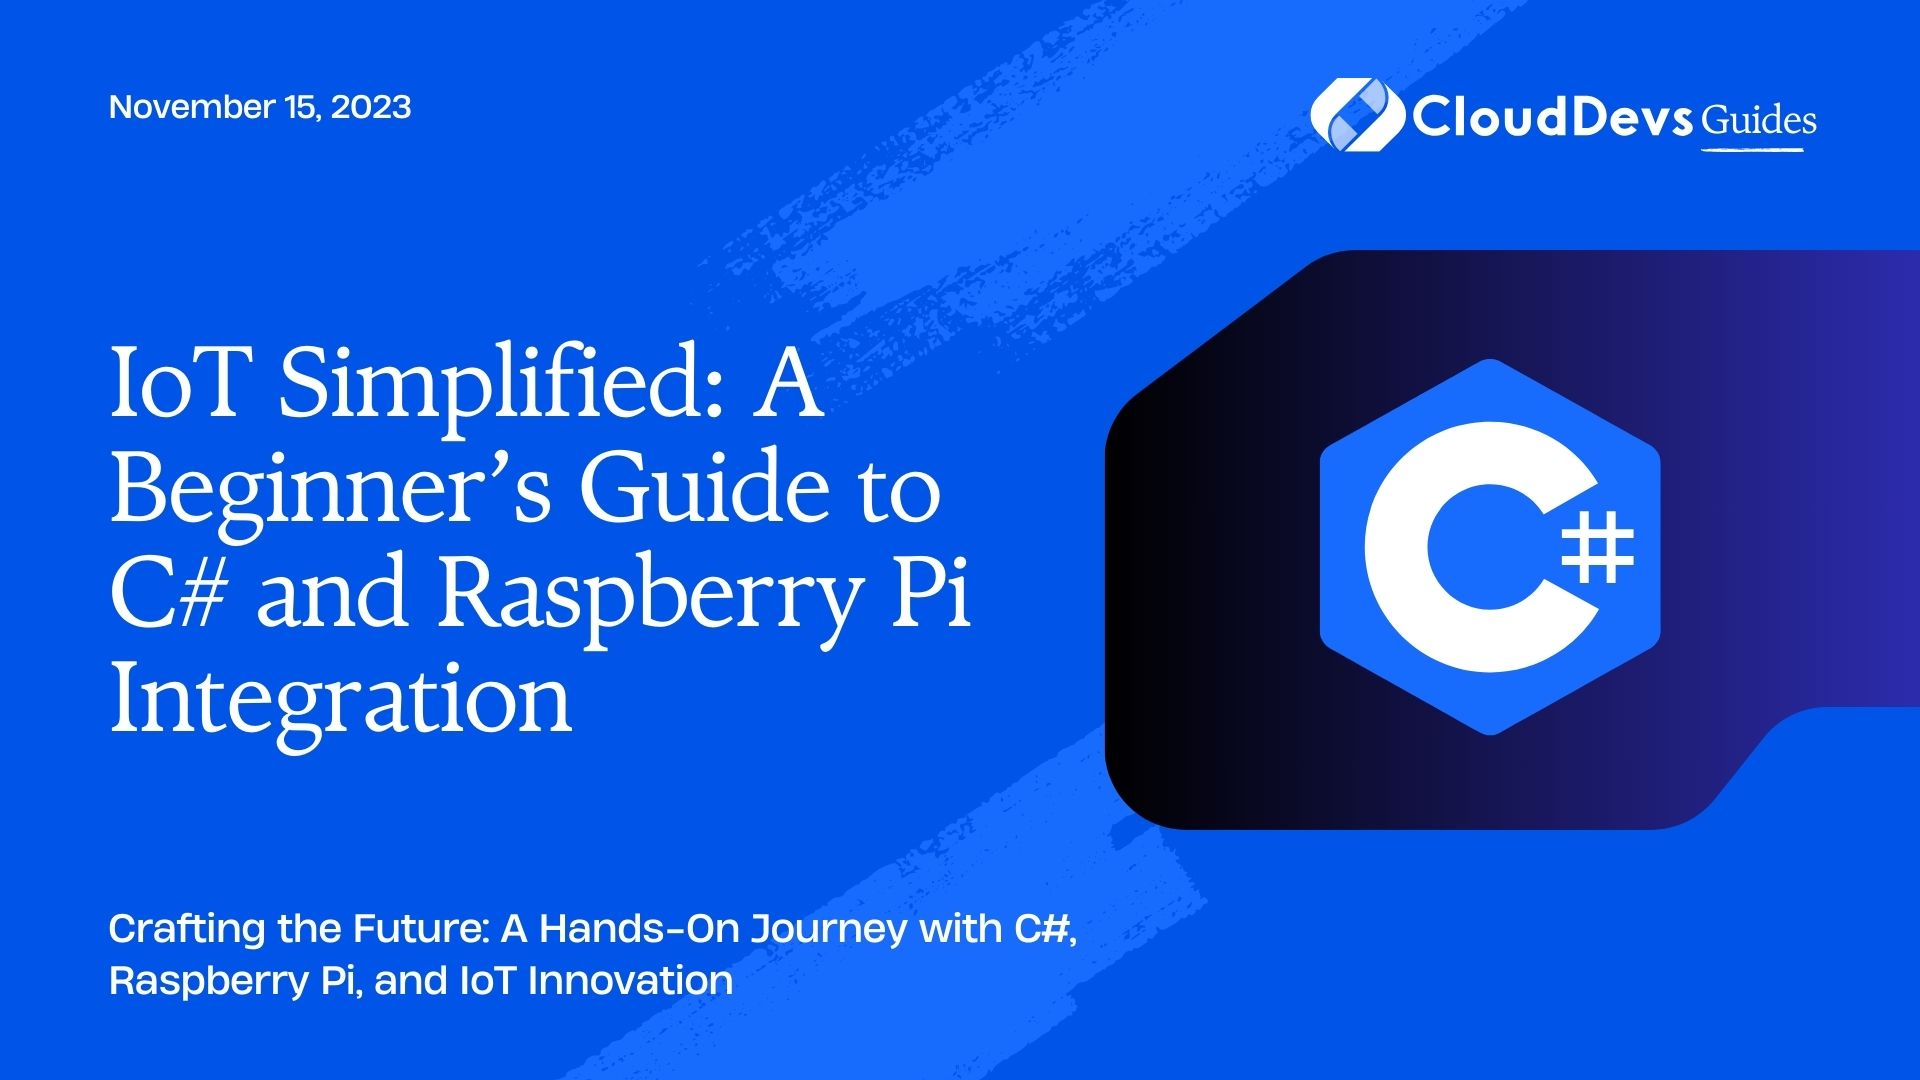 IoT Simplified: A Beginner’s Guide to C# and Raspberry Pi Integration